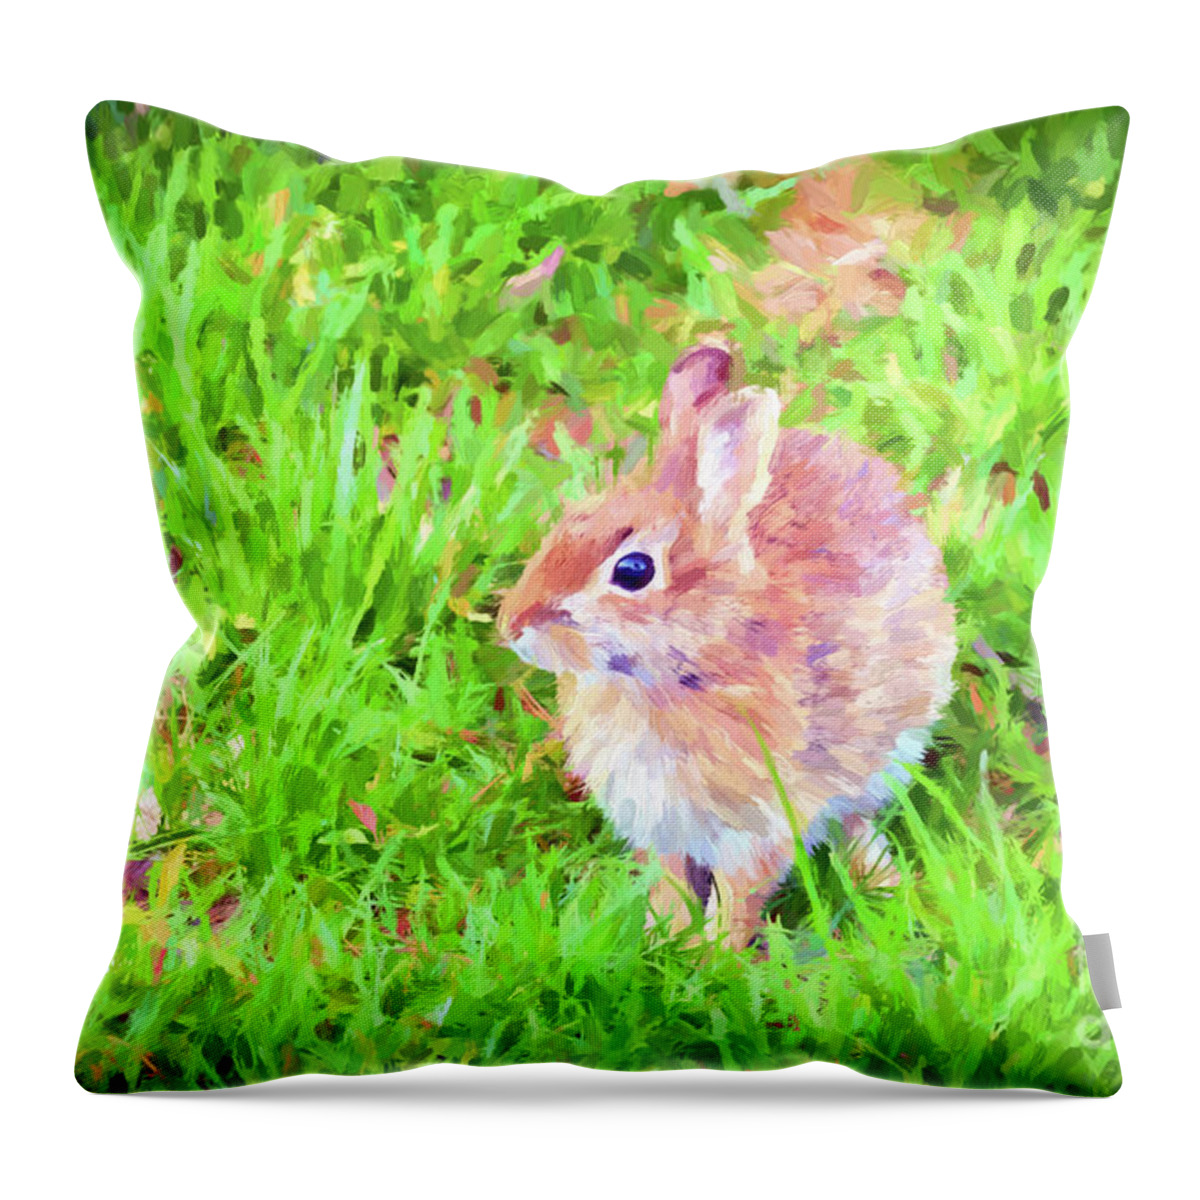 Bunny Throw Pillow featuring the photograph Bunny Beautiful by Kerri Farley